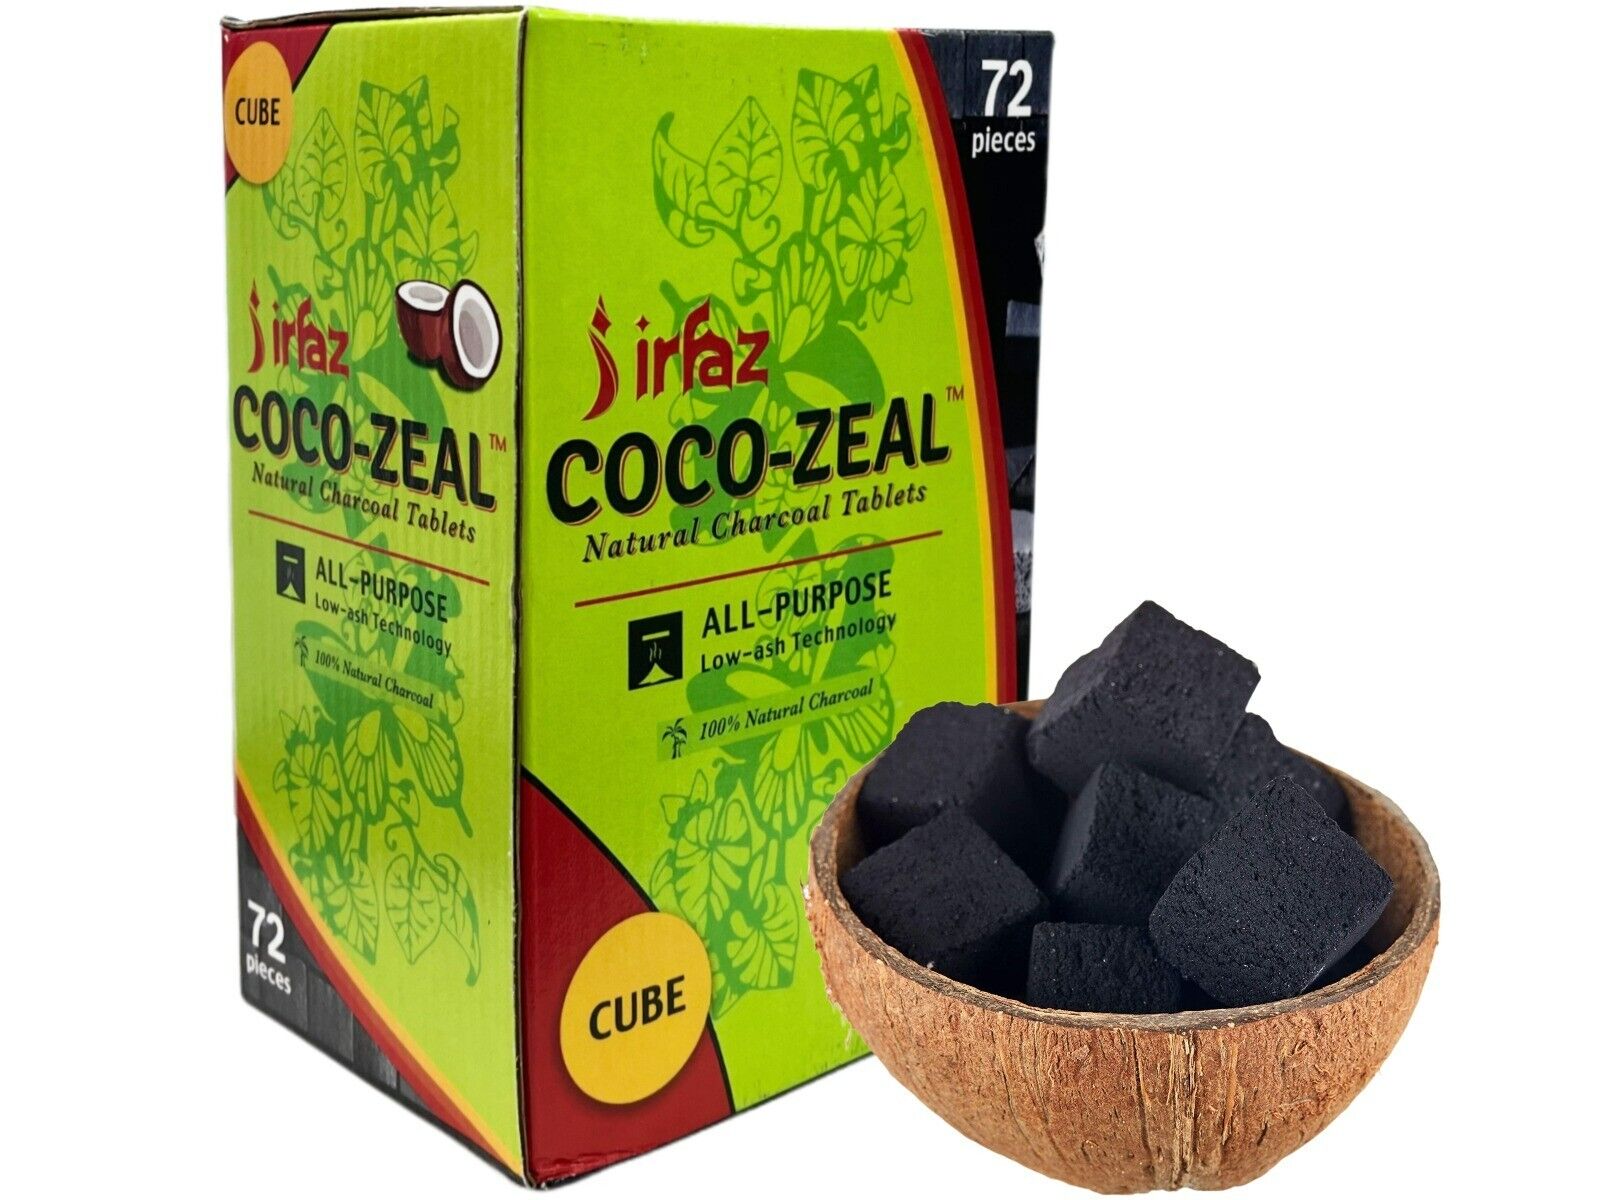 Irfaz Coco-Zeal Natural Coconut Shell Charcoals 72 Cubes Afzal Hookah Retail Pkg